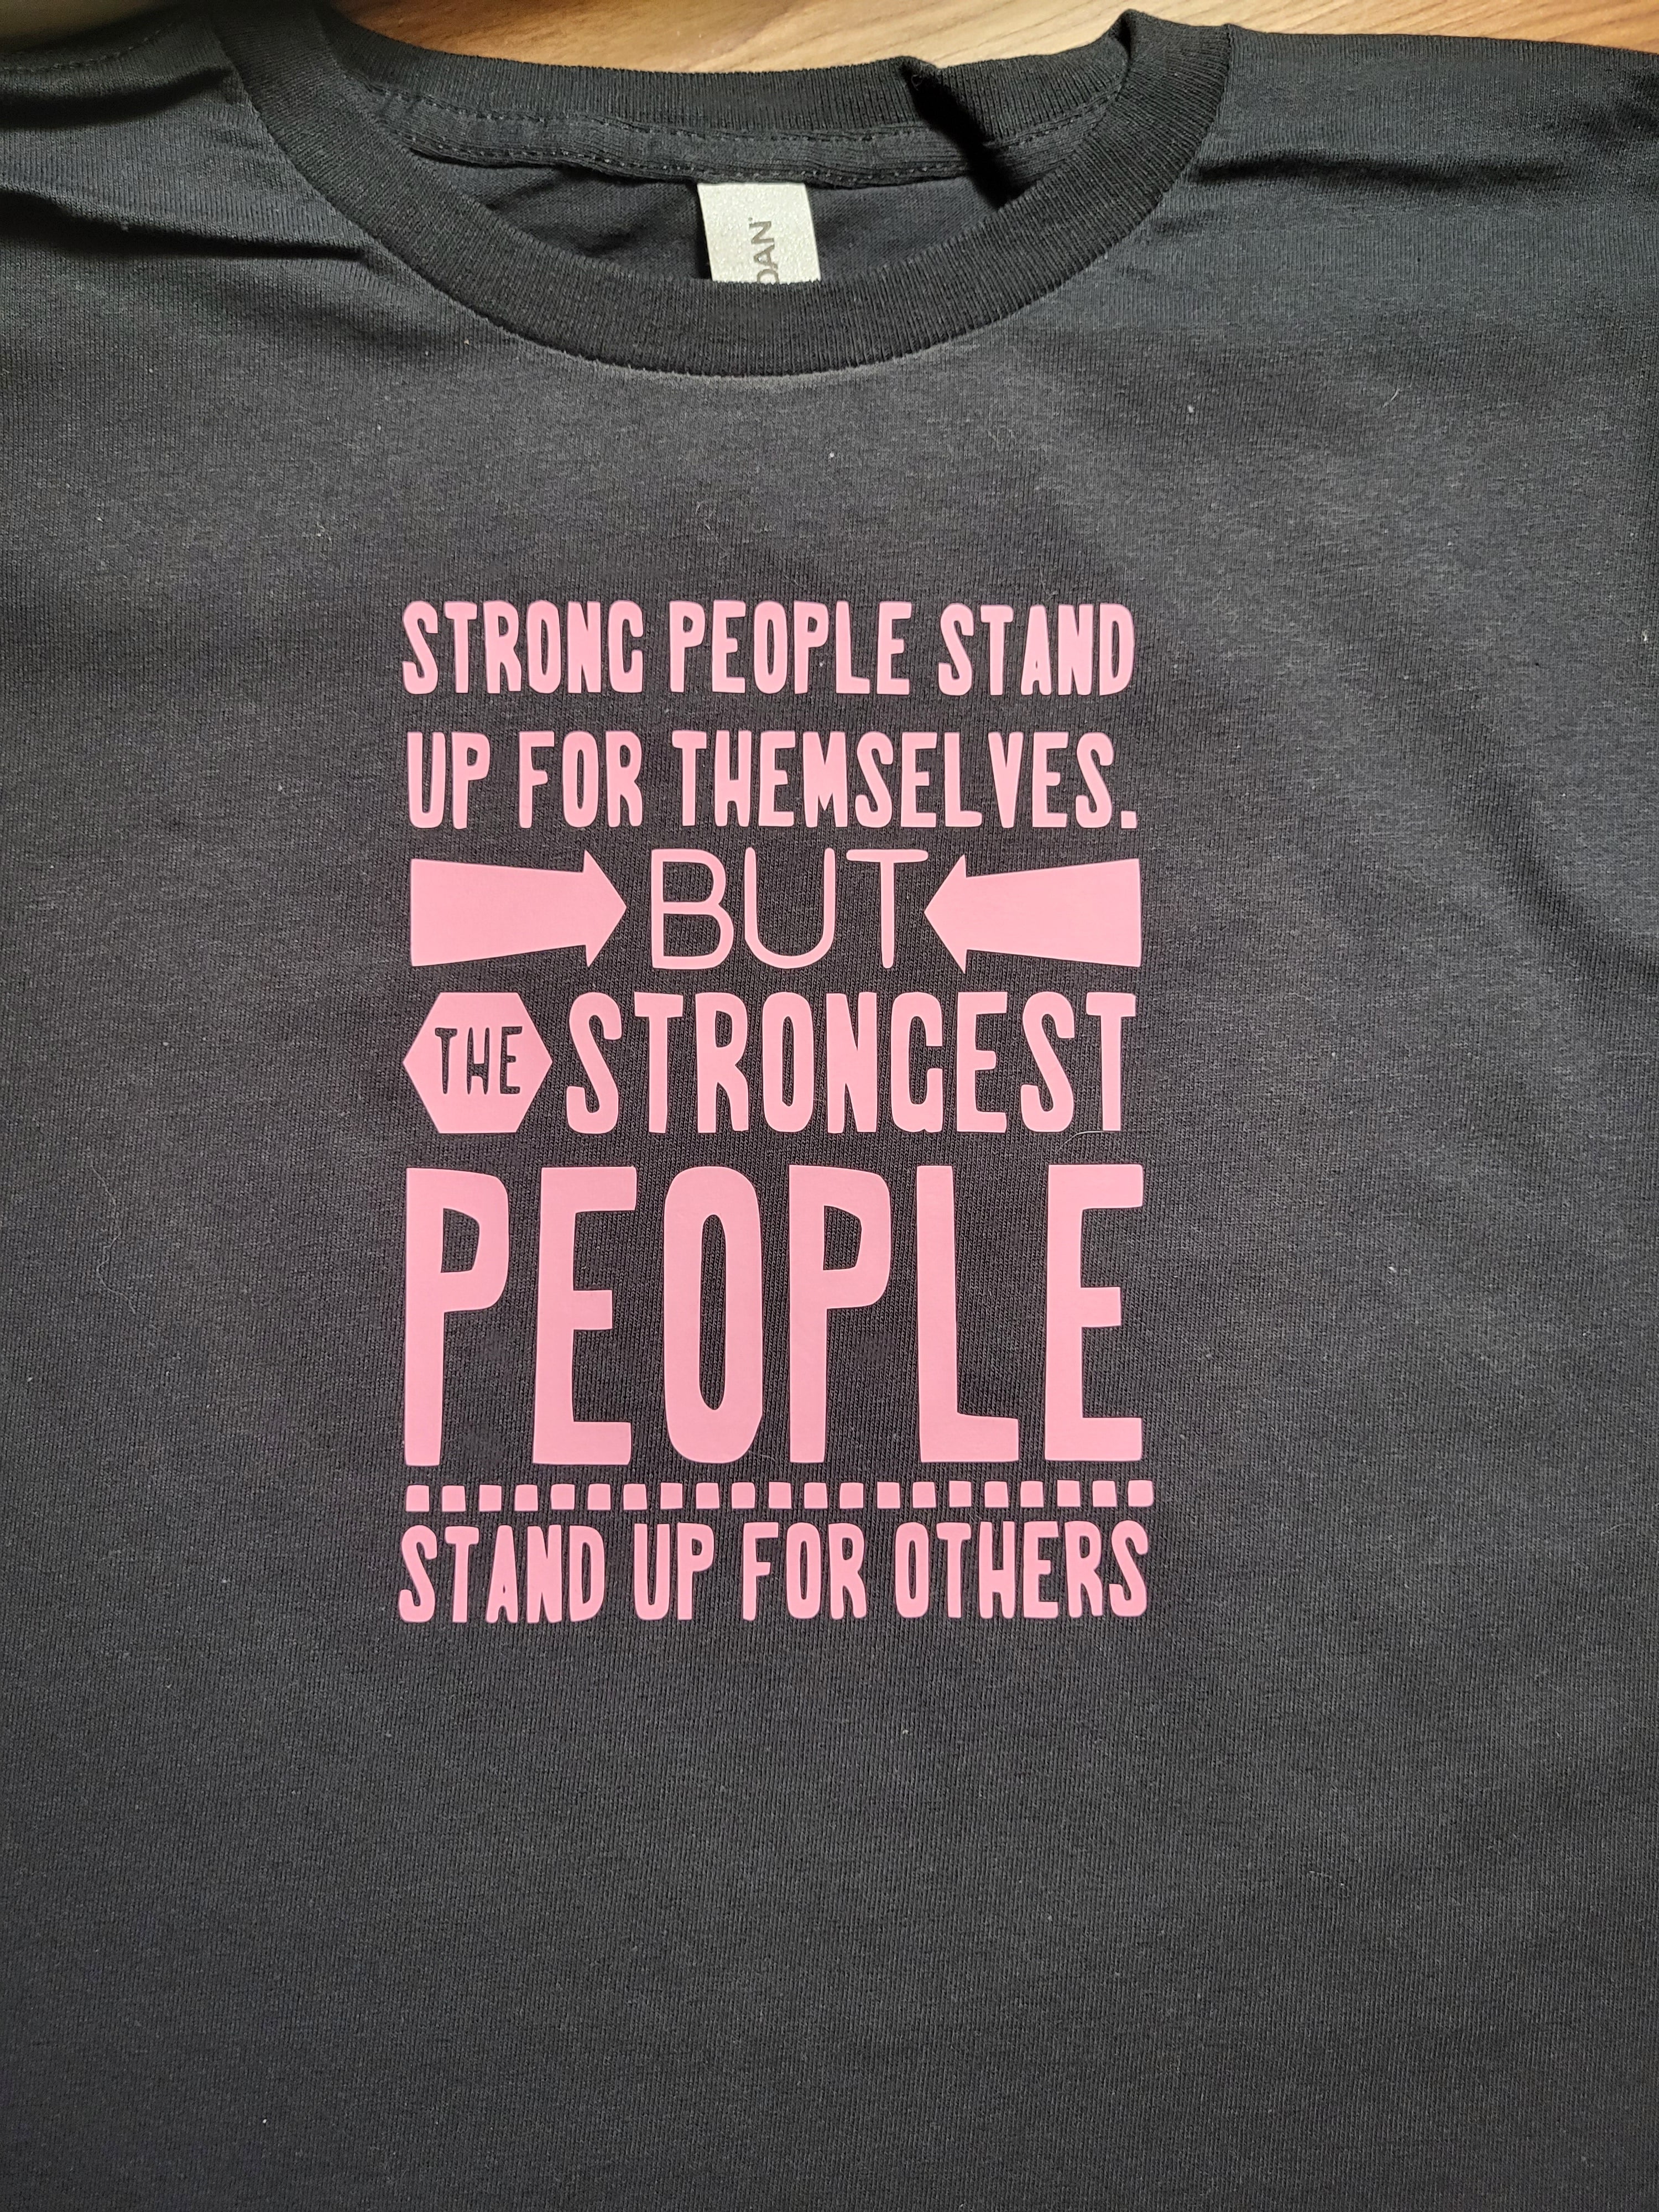 Strong people stand | Pink Shirt Day | T-shirt